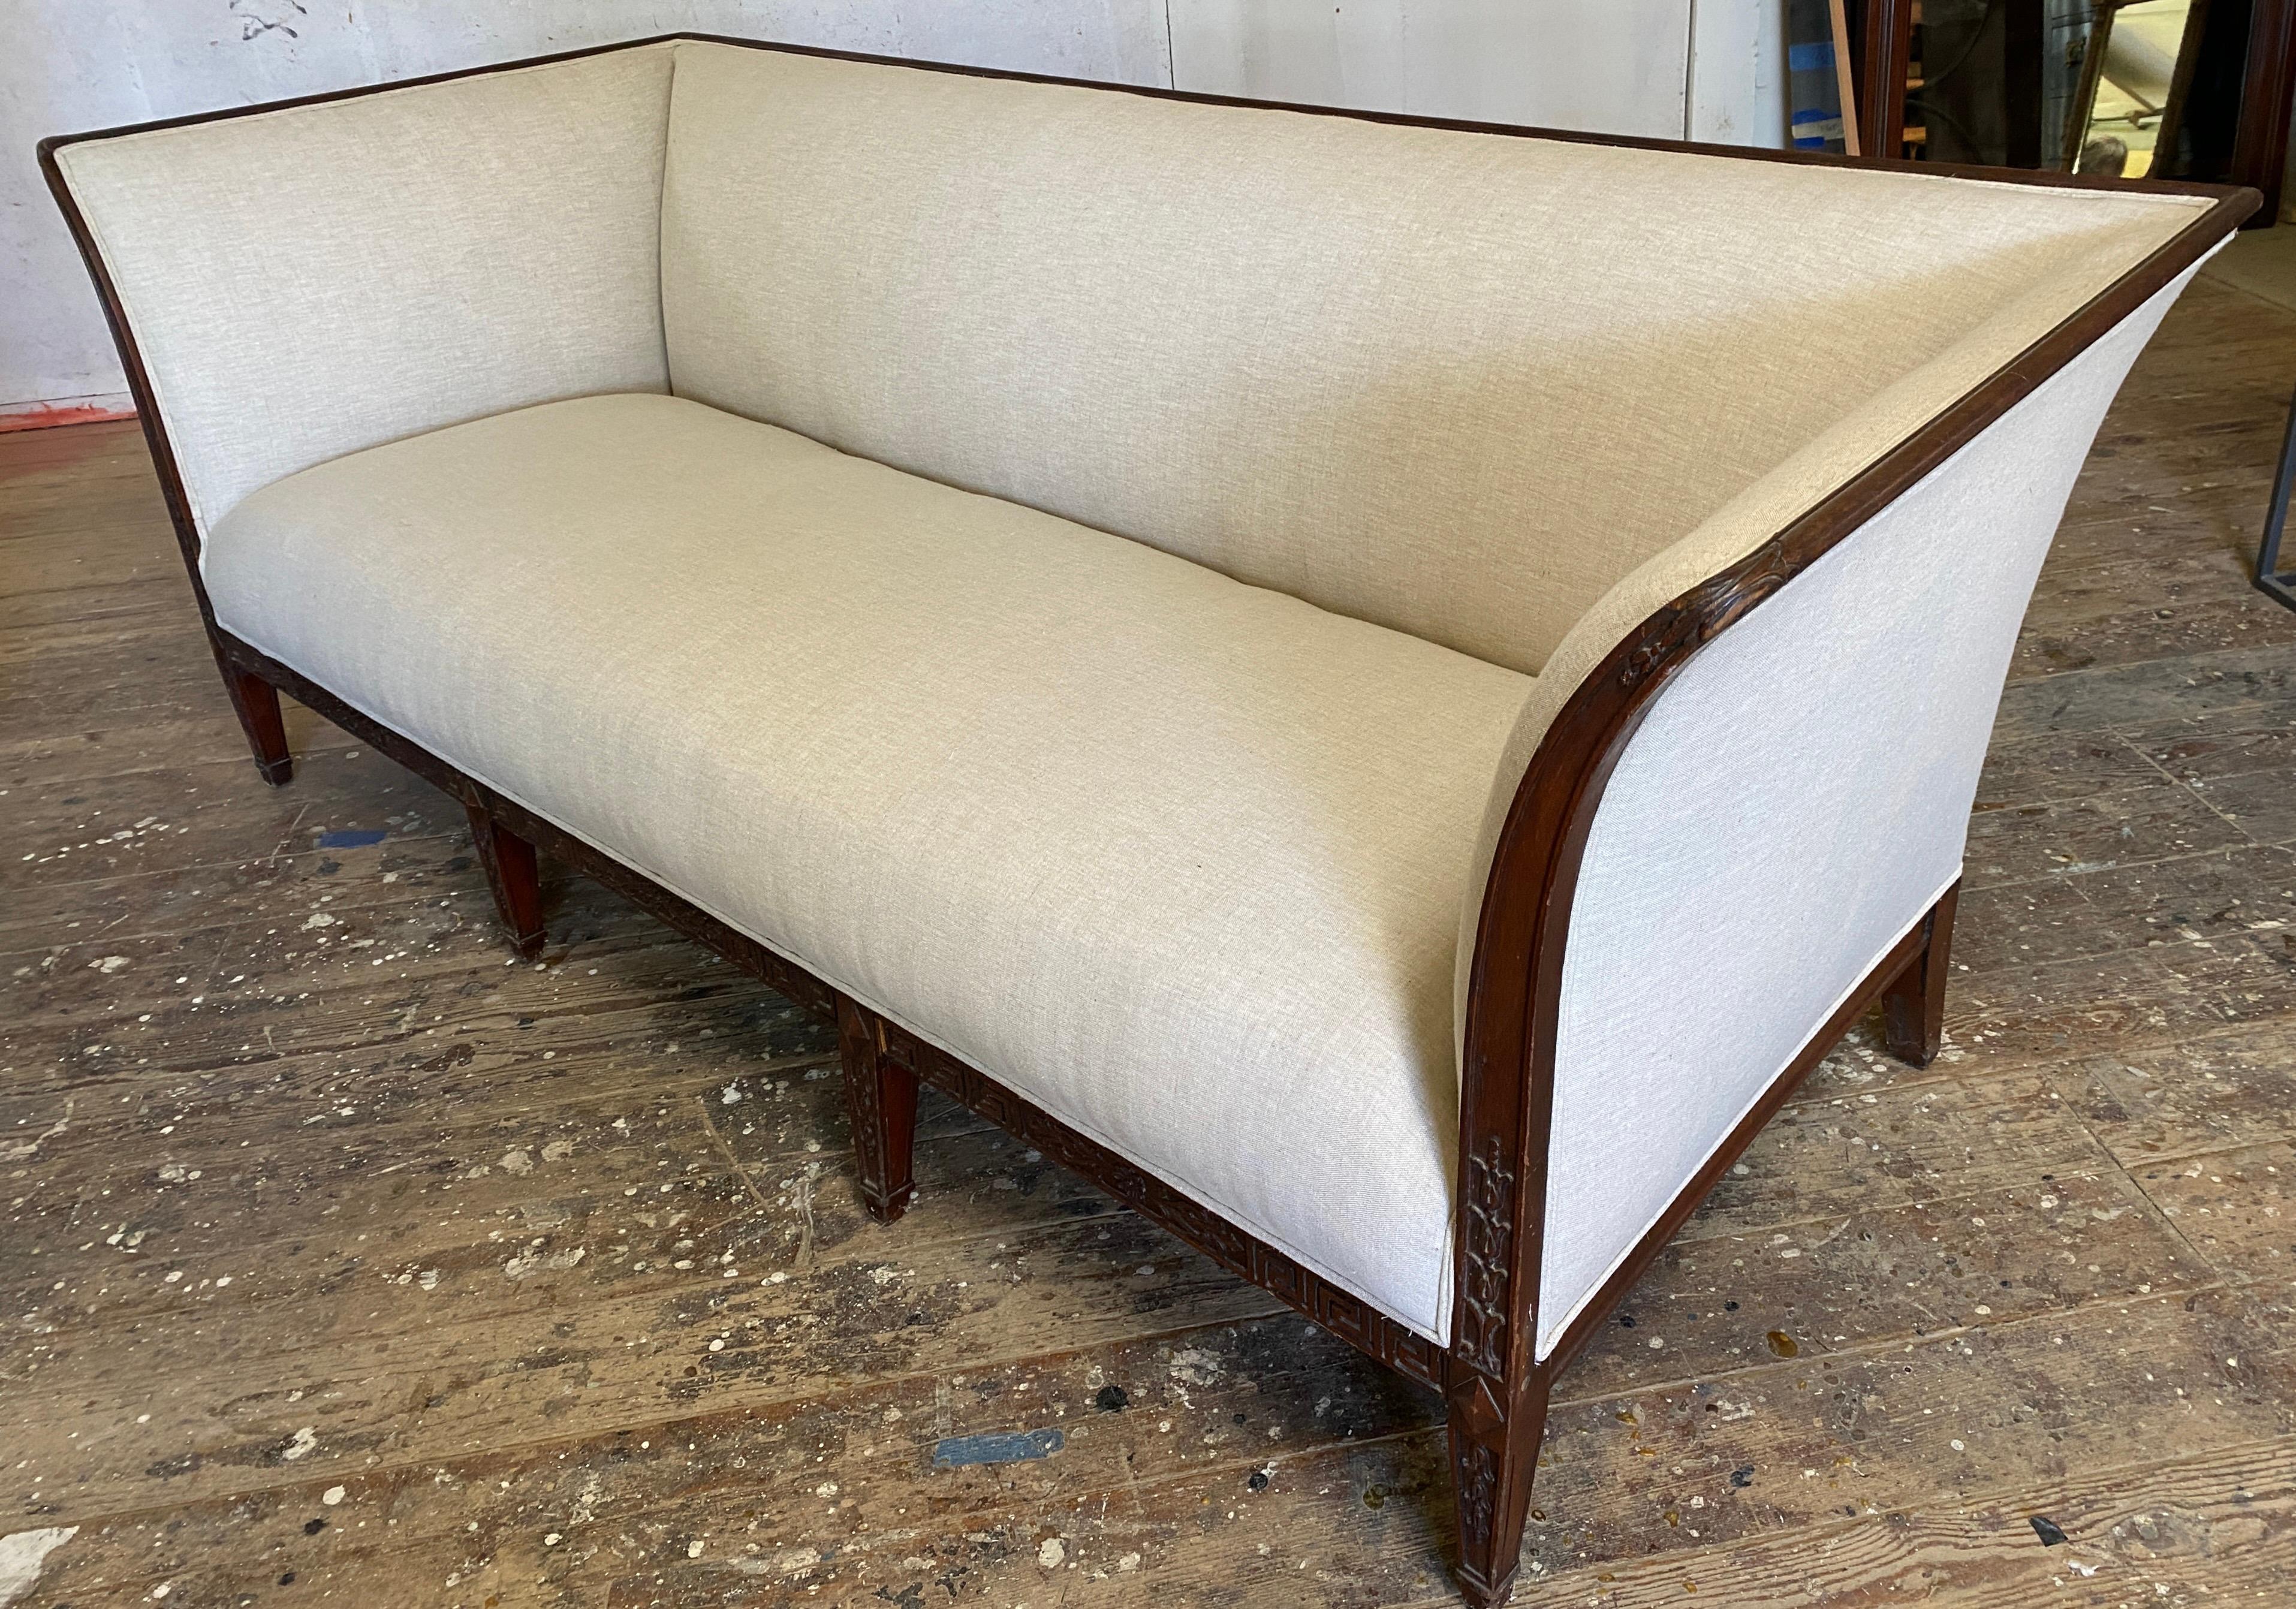 Early 20th C. Chippendale Style Sofa en vente 8